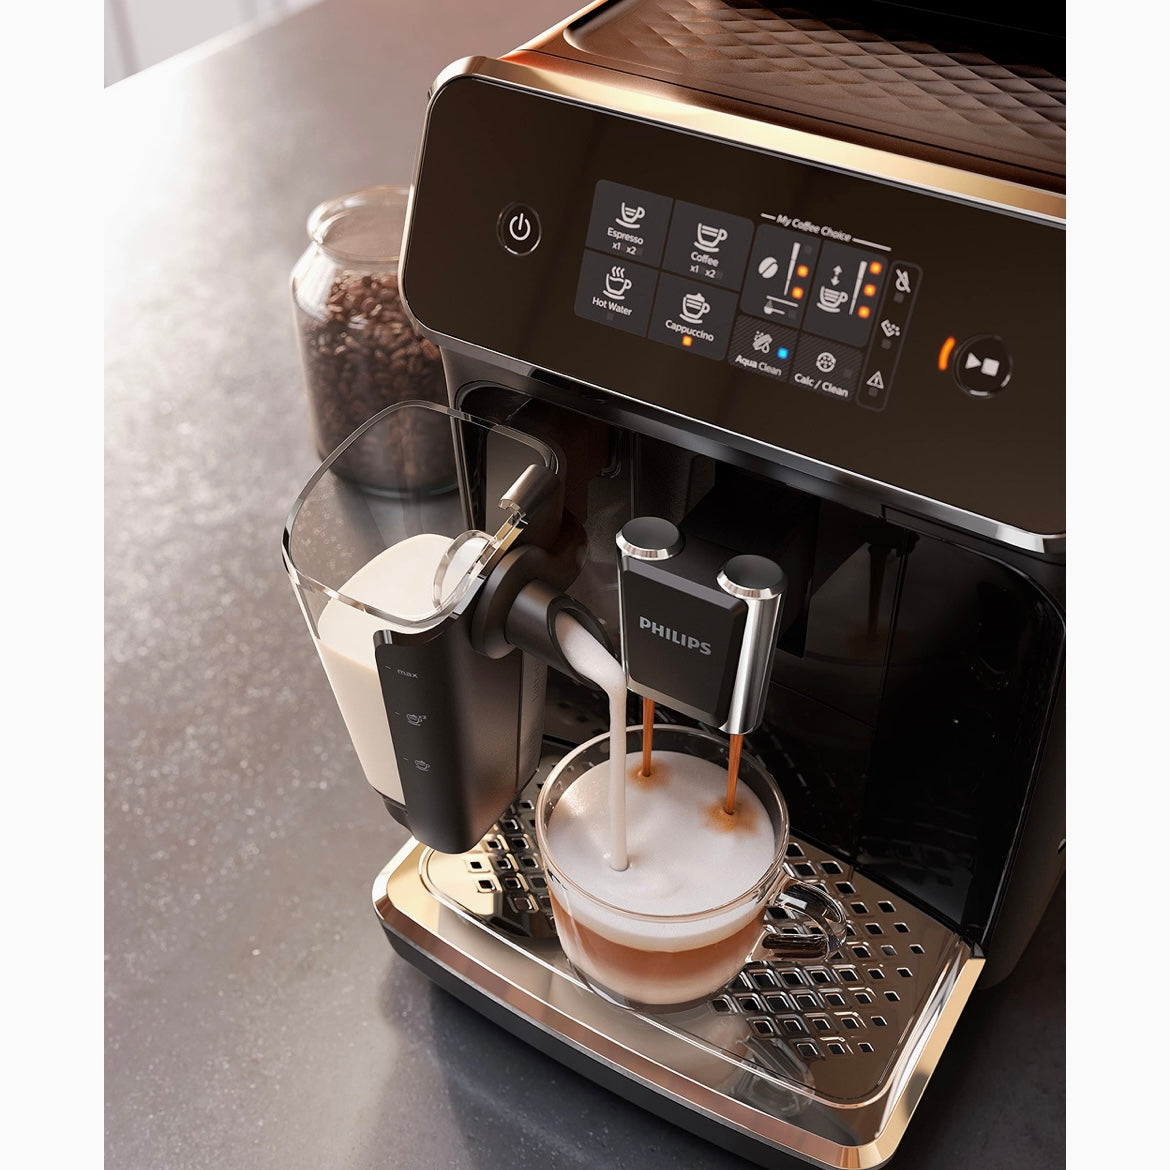 Philips 2200 Series LatteGo Frother Fully Auto Espresso Machine